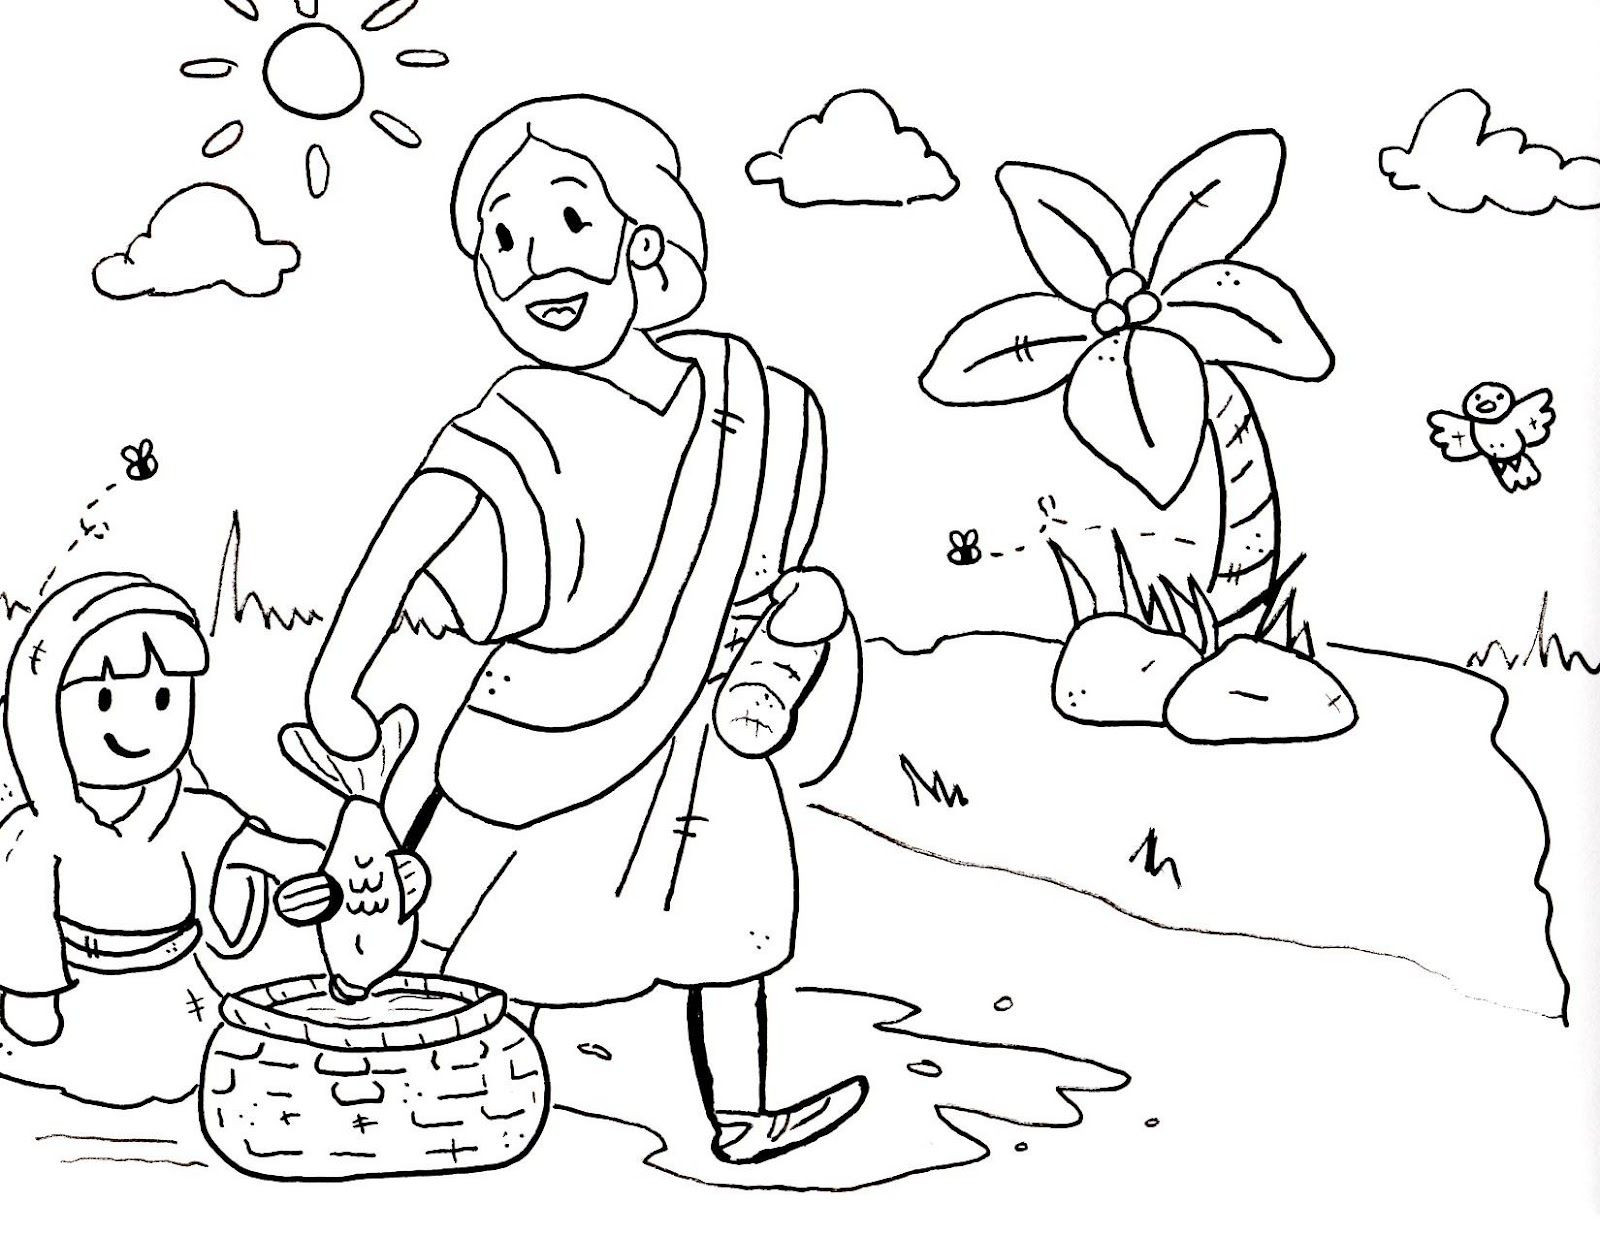 Children Sunday School Coloring Pages
 Sunday School Coloring Pages